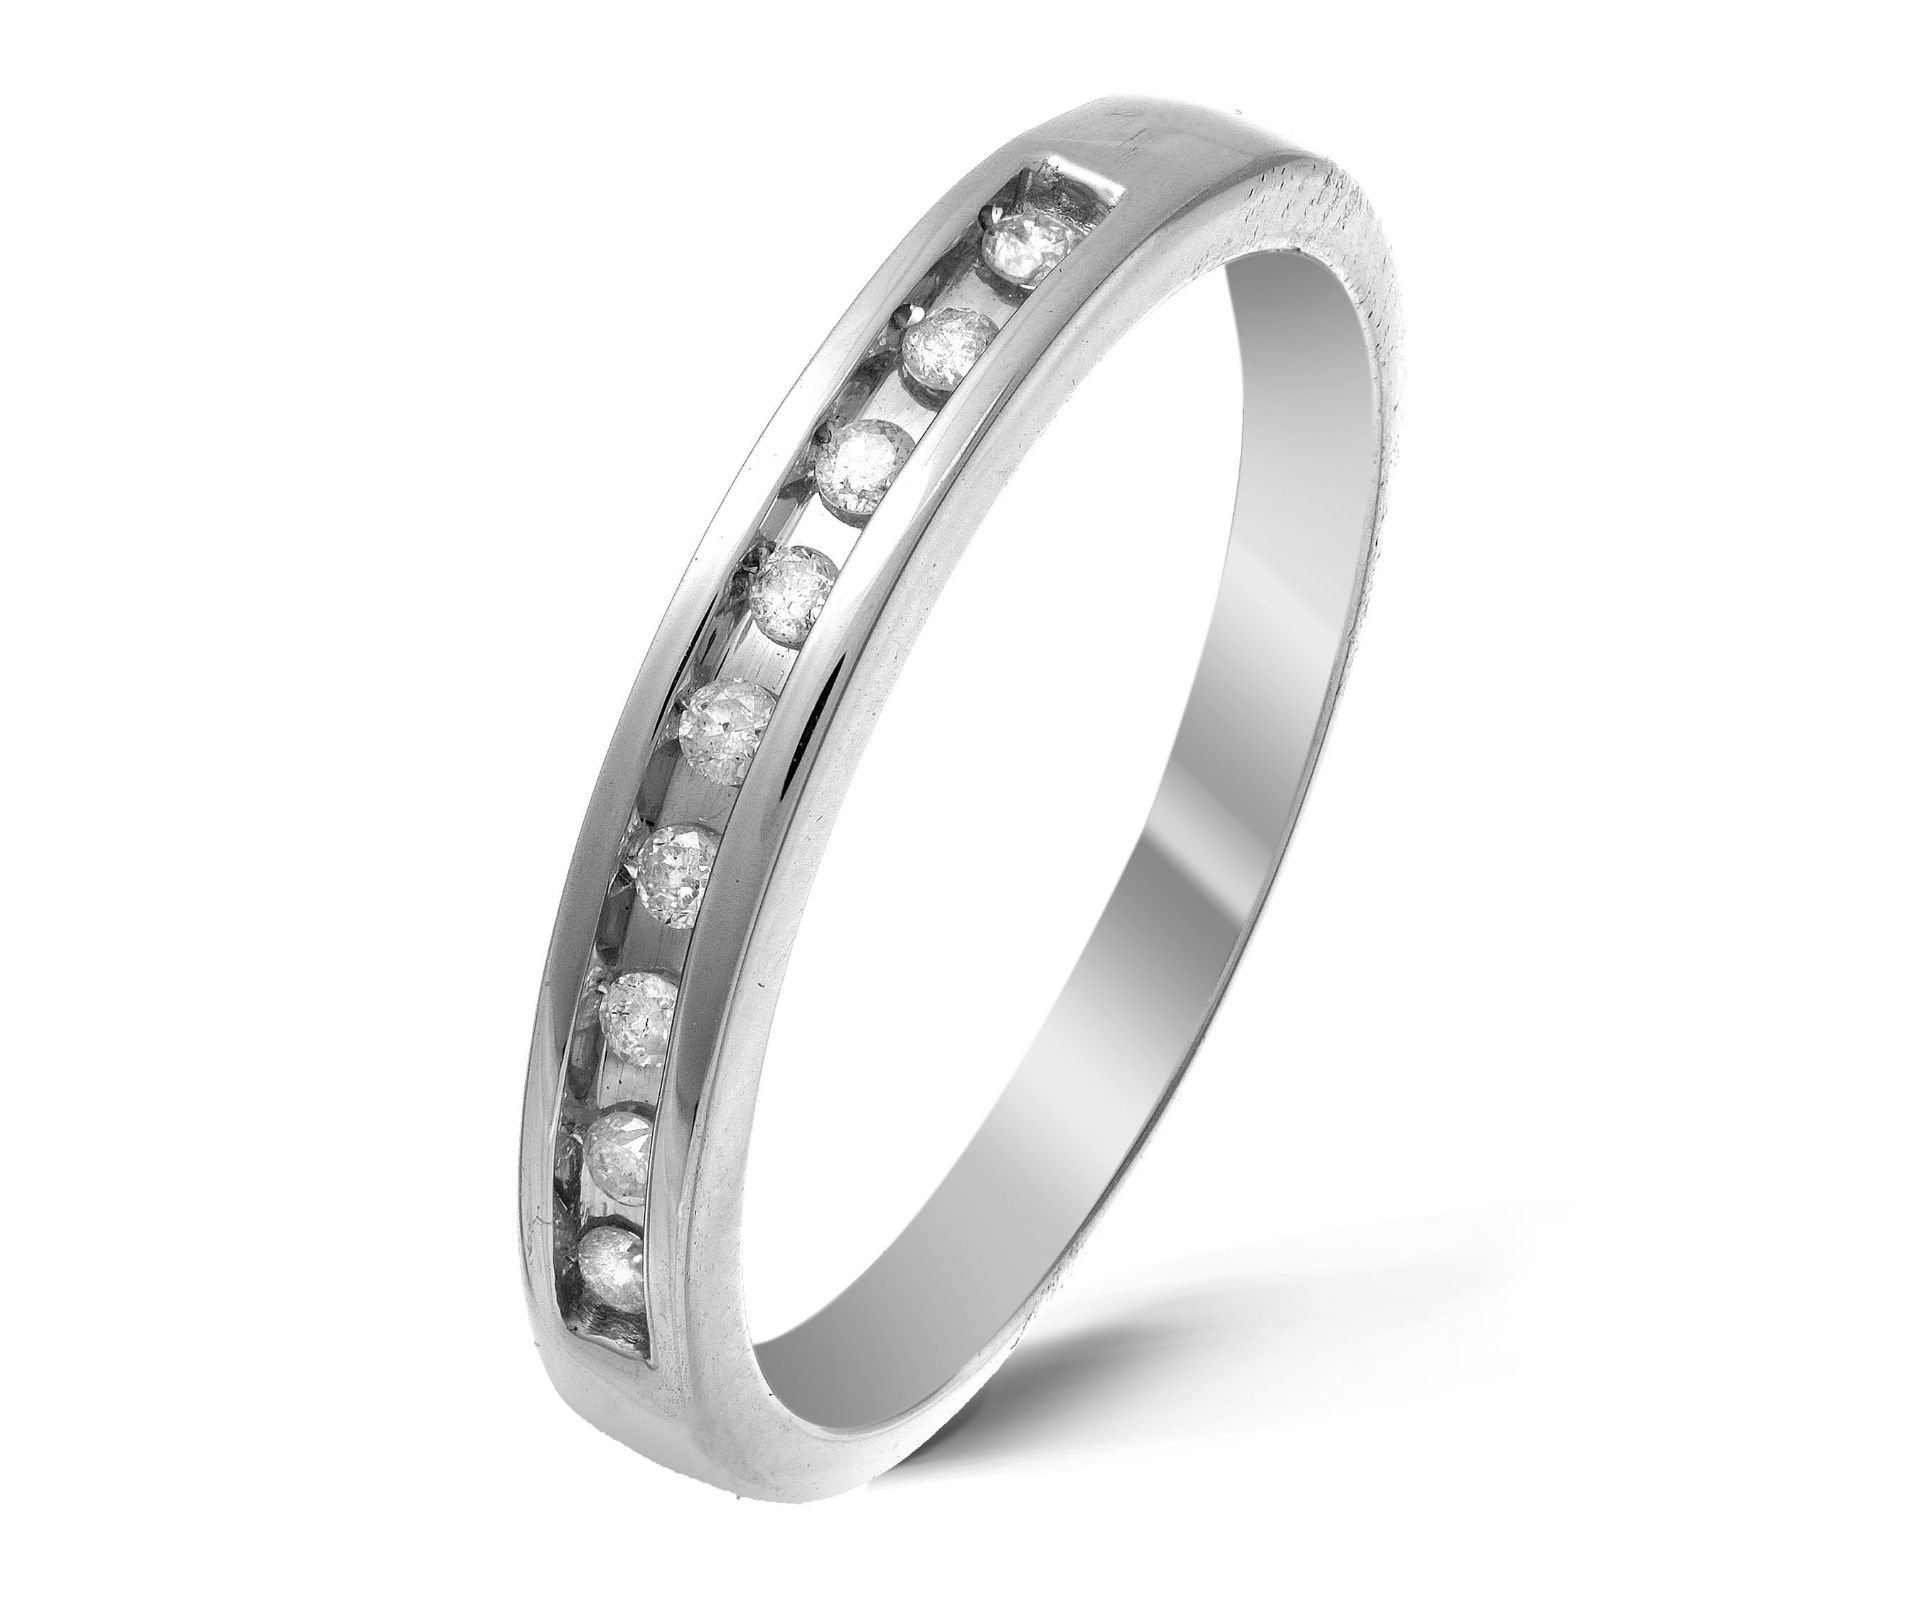 White Gold Channel Set Eternity ring with 1/10cttw diamonds Size P RRP £439 (URFX0787W)